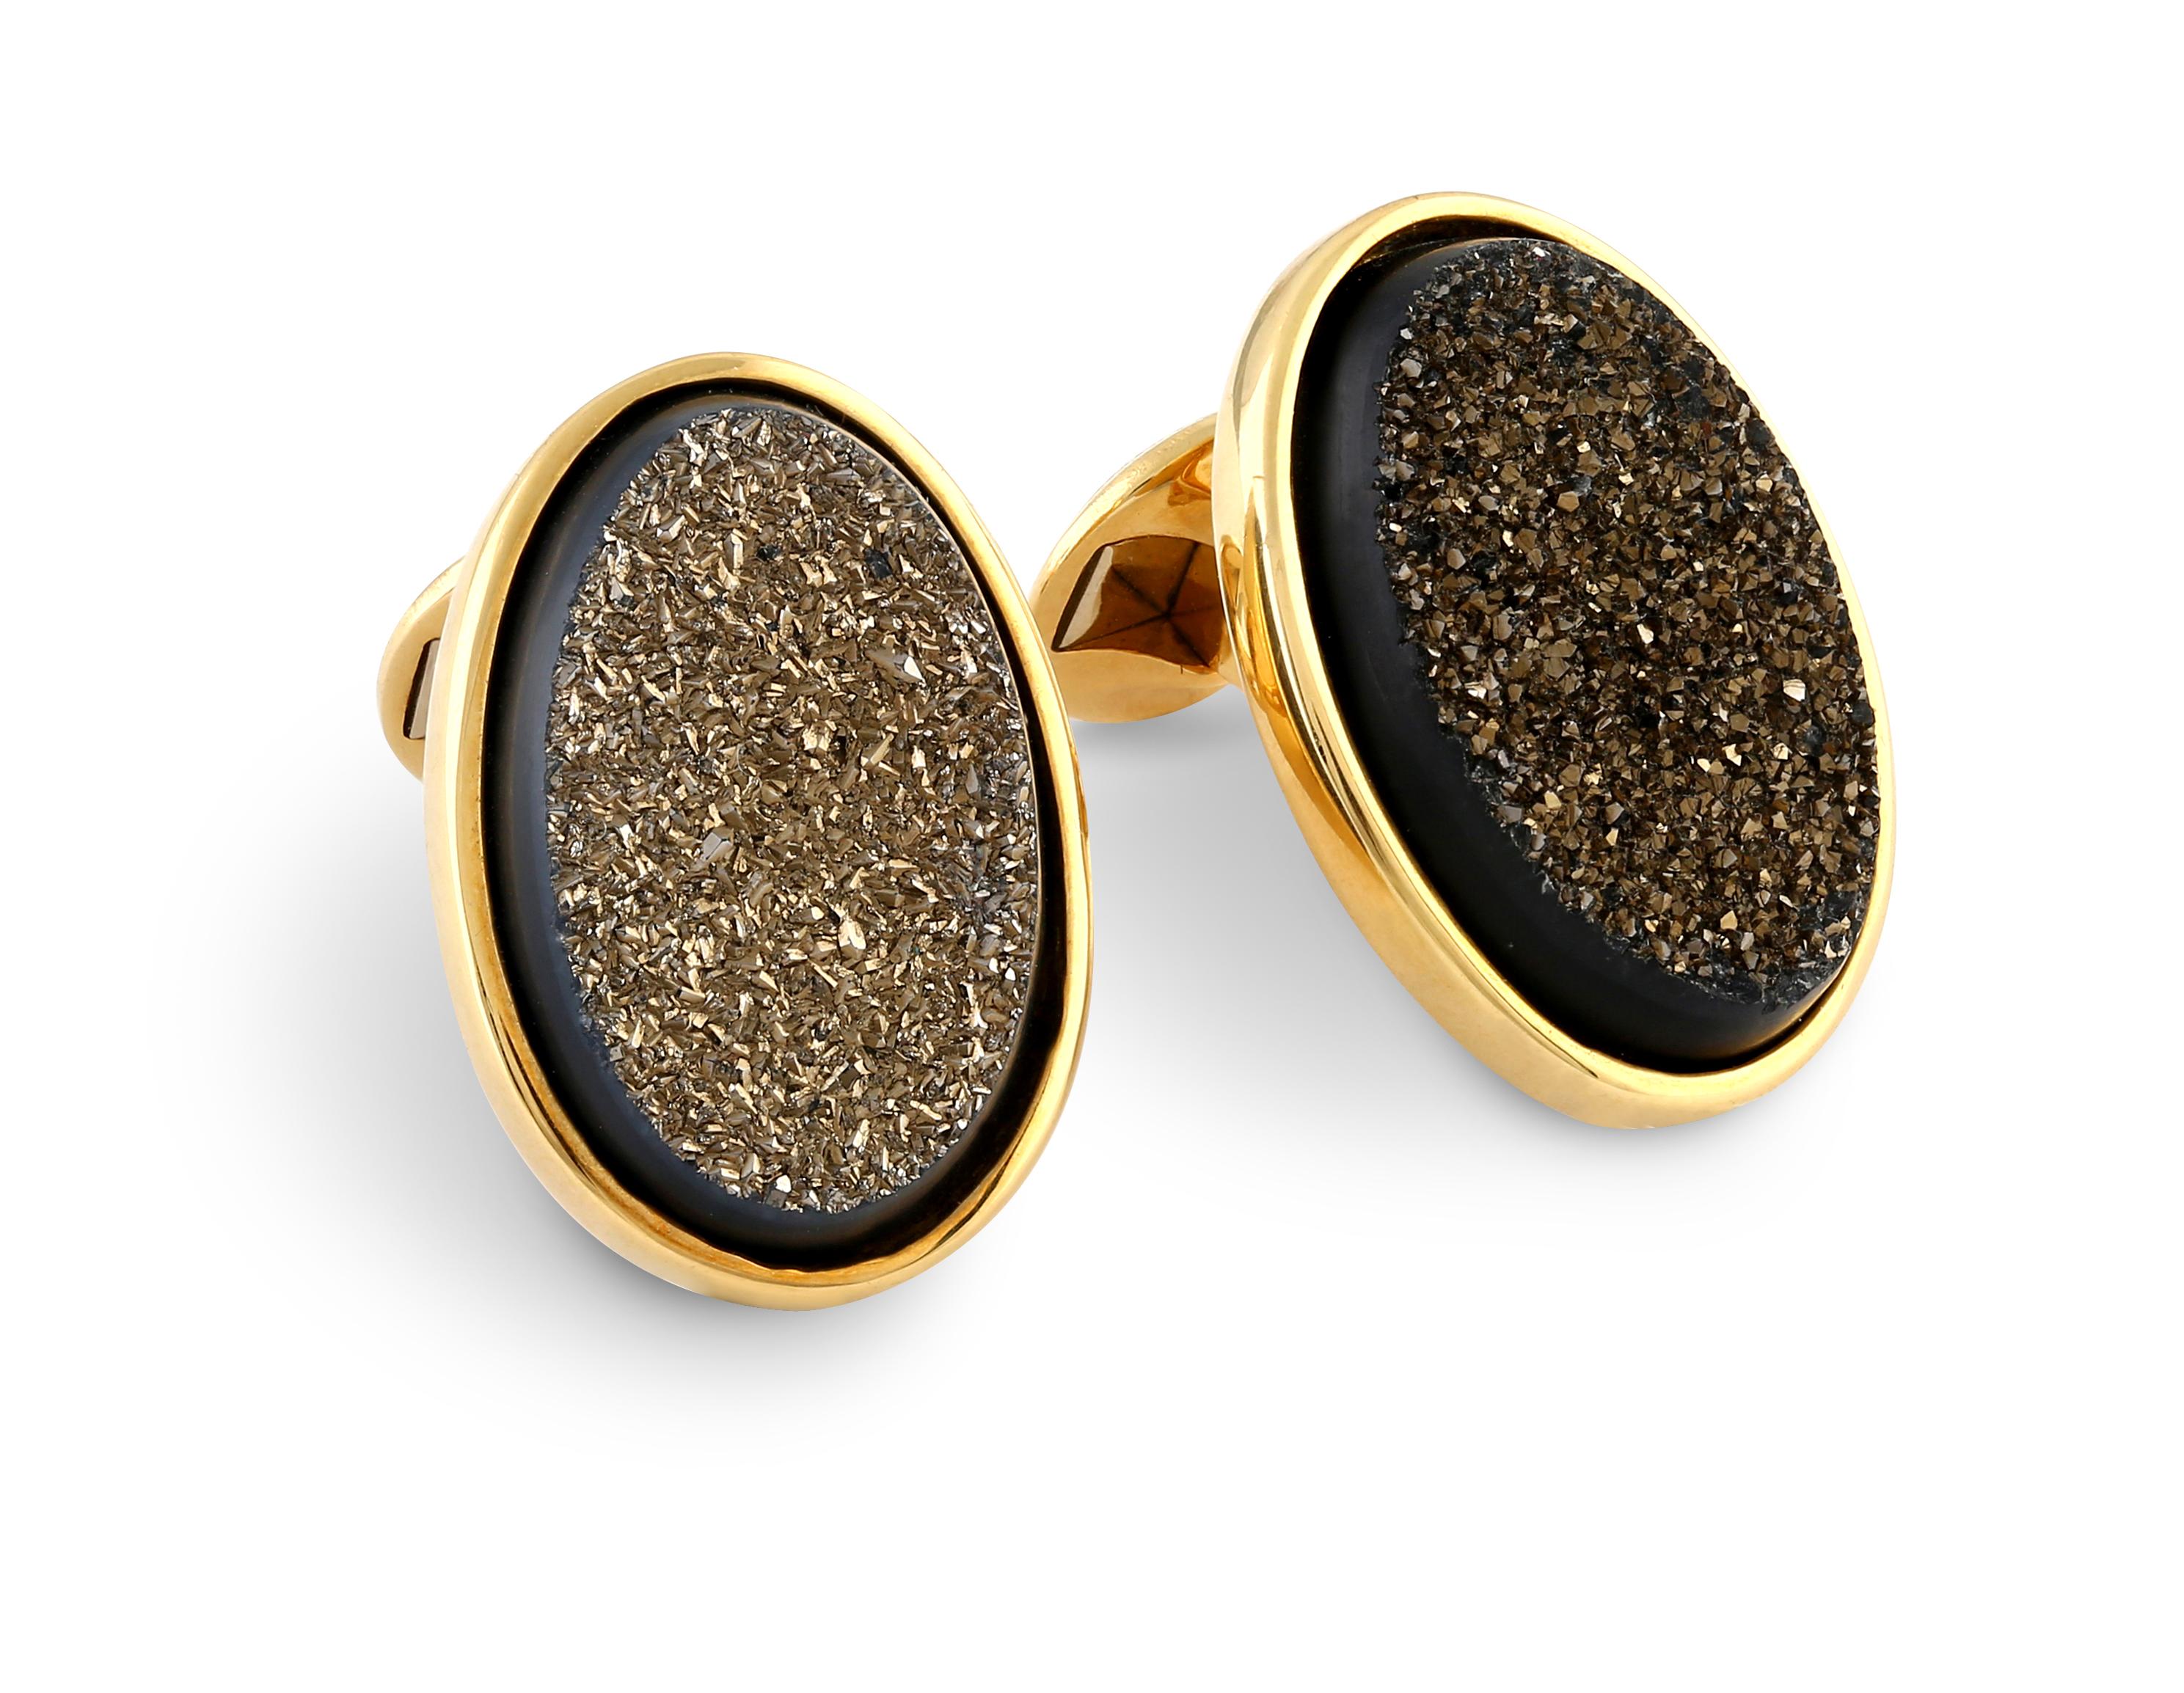 Drusy is a geological name used to describe the formation of unique small crystals over quartz, lining a surface. The glittering crystals of each drusy has been set within a bezel case, letting the stone become the centrepiece. An exquisite natural